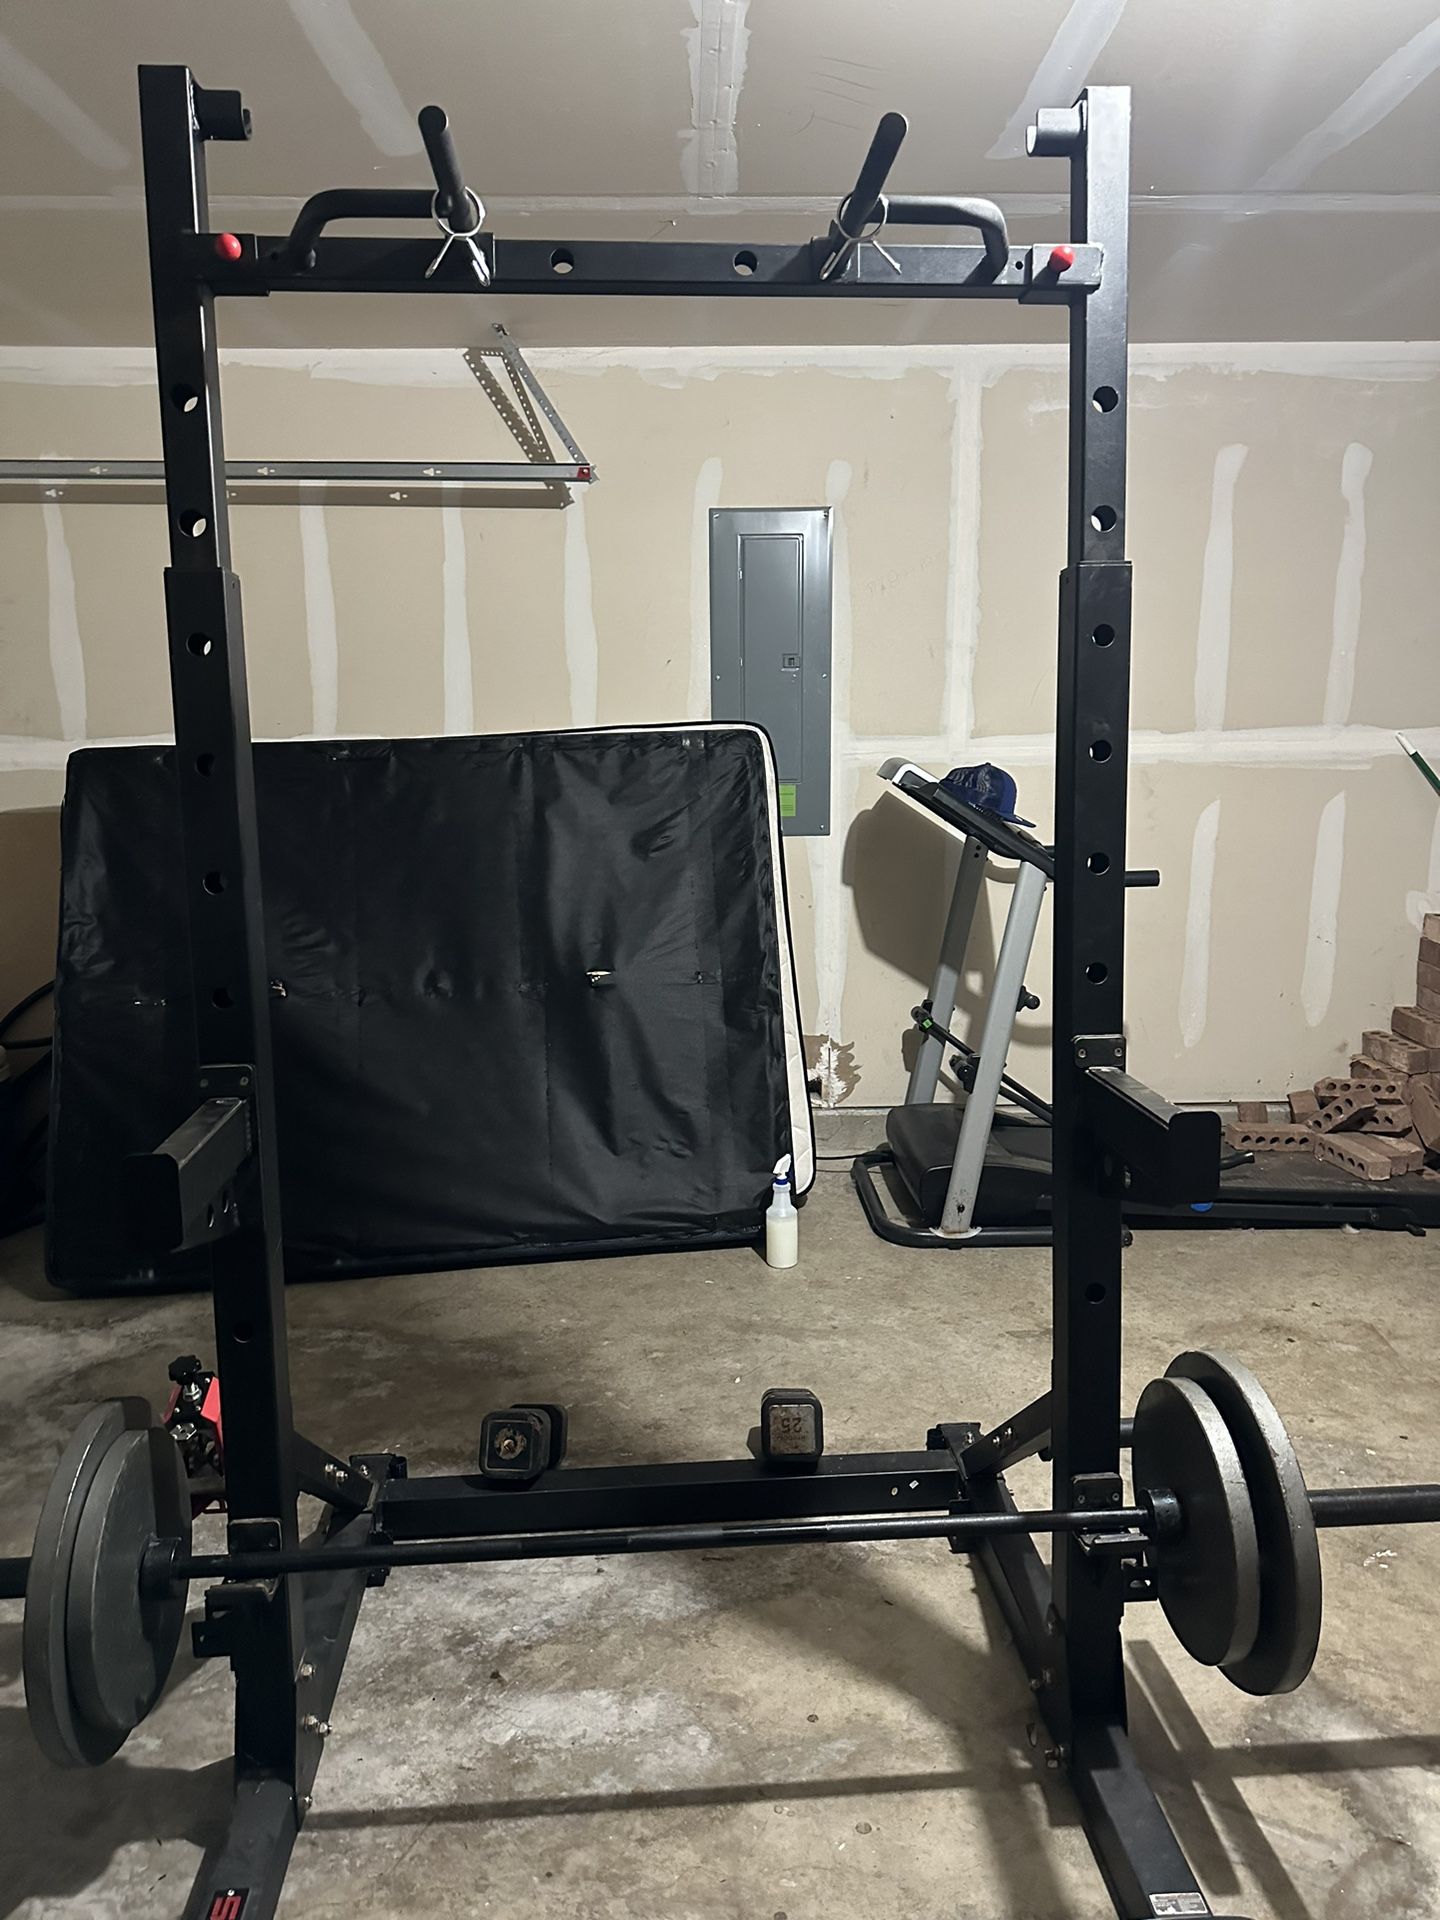 Squat Rack With Olympic Bar Trade For Lawn Equipment 